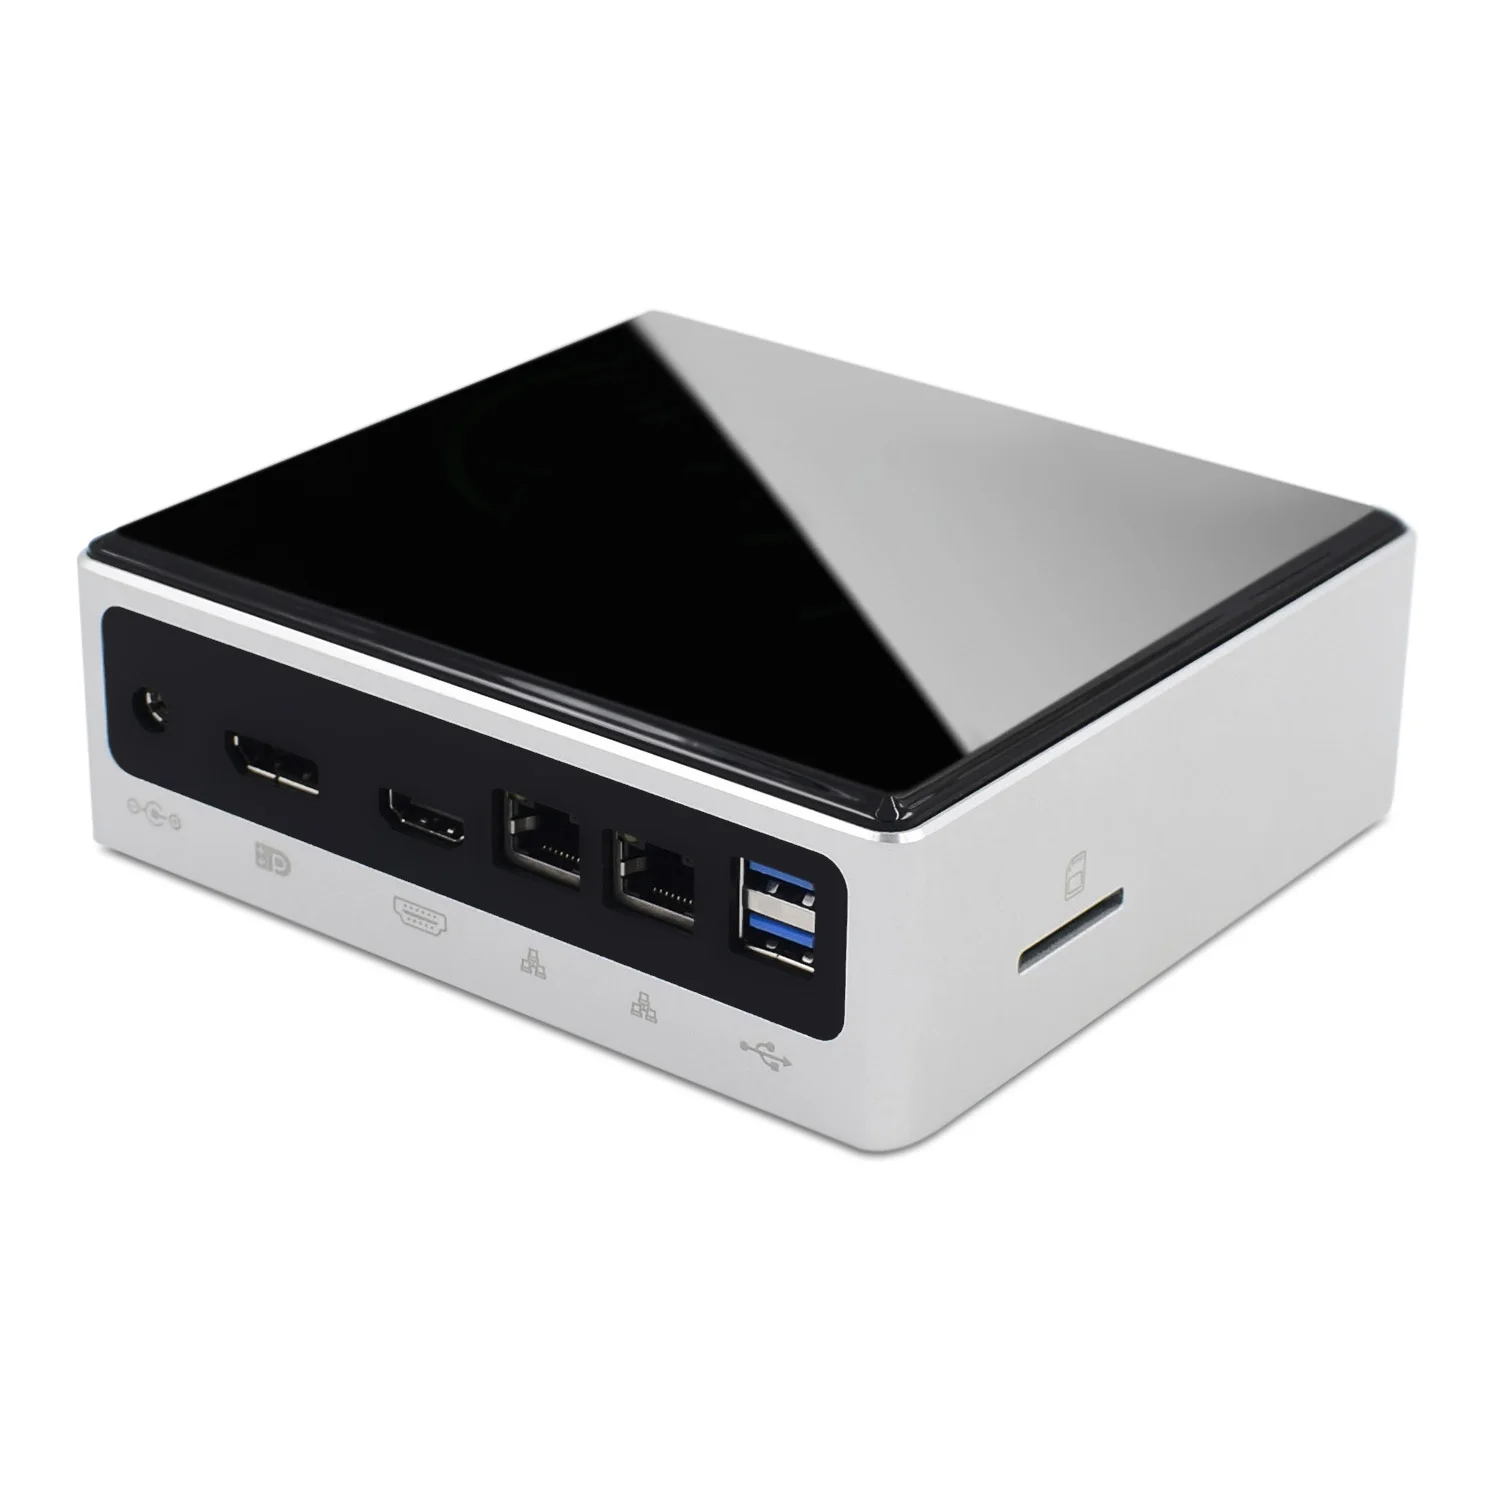 

Newest Nuc Mini pc In tel Core i5 10210U 12MB Cache DDR4 M.2 SSD NVMe Win10 Linux Dual Band WiFi HD DP 4K 60Hz Type C for PUBG